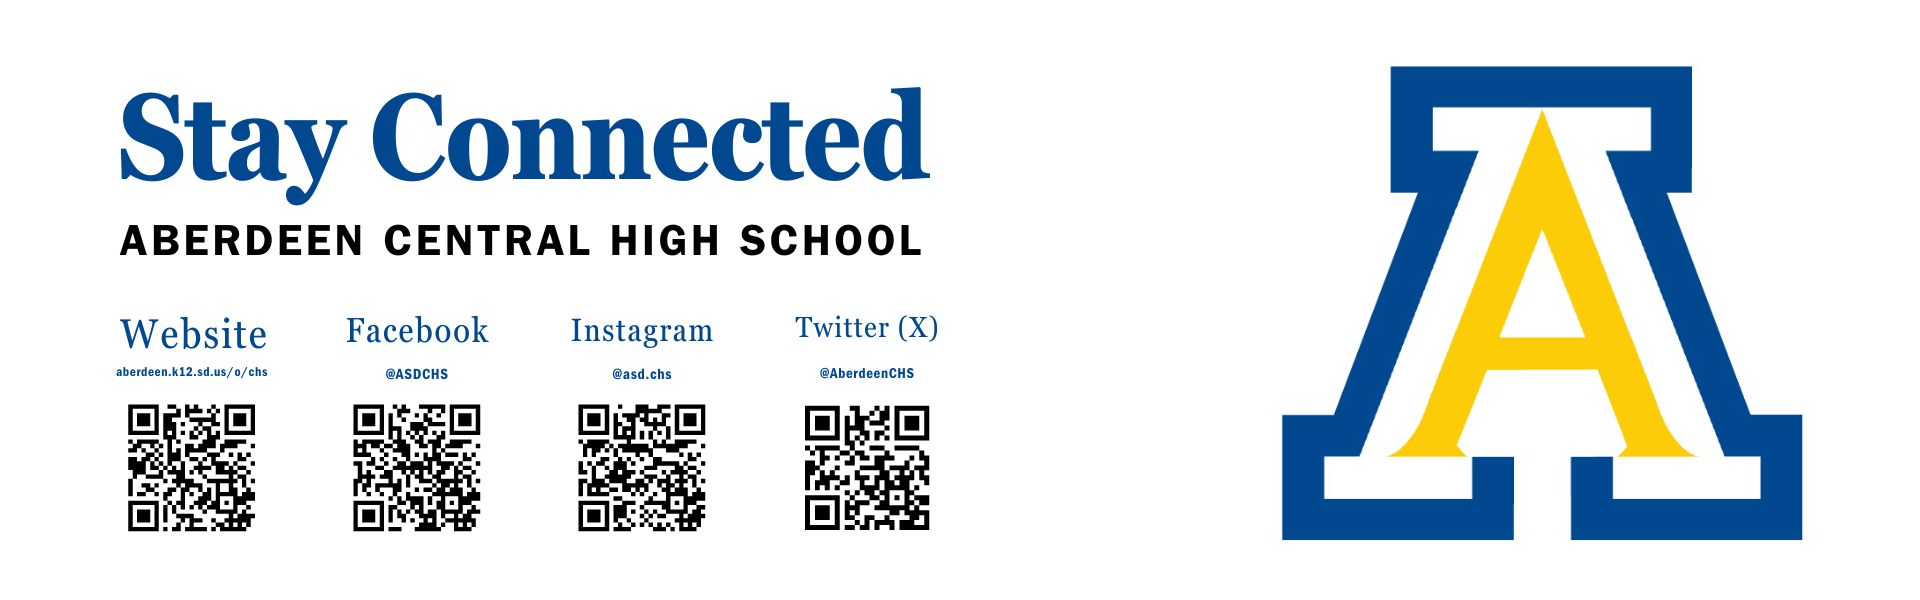 Stay Connected graphic with QR codes linking to CHS social media